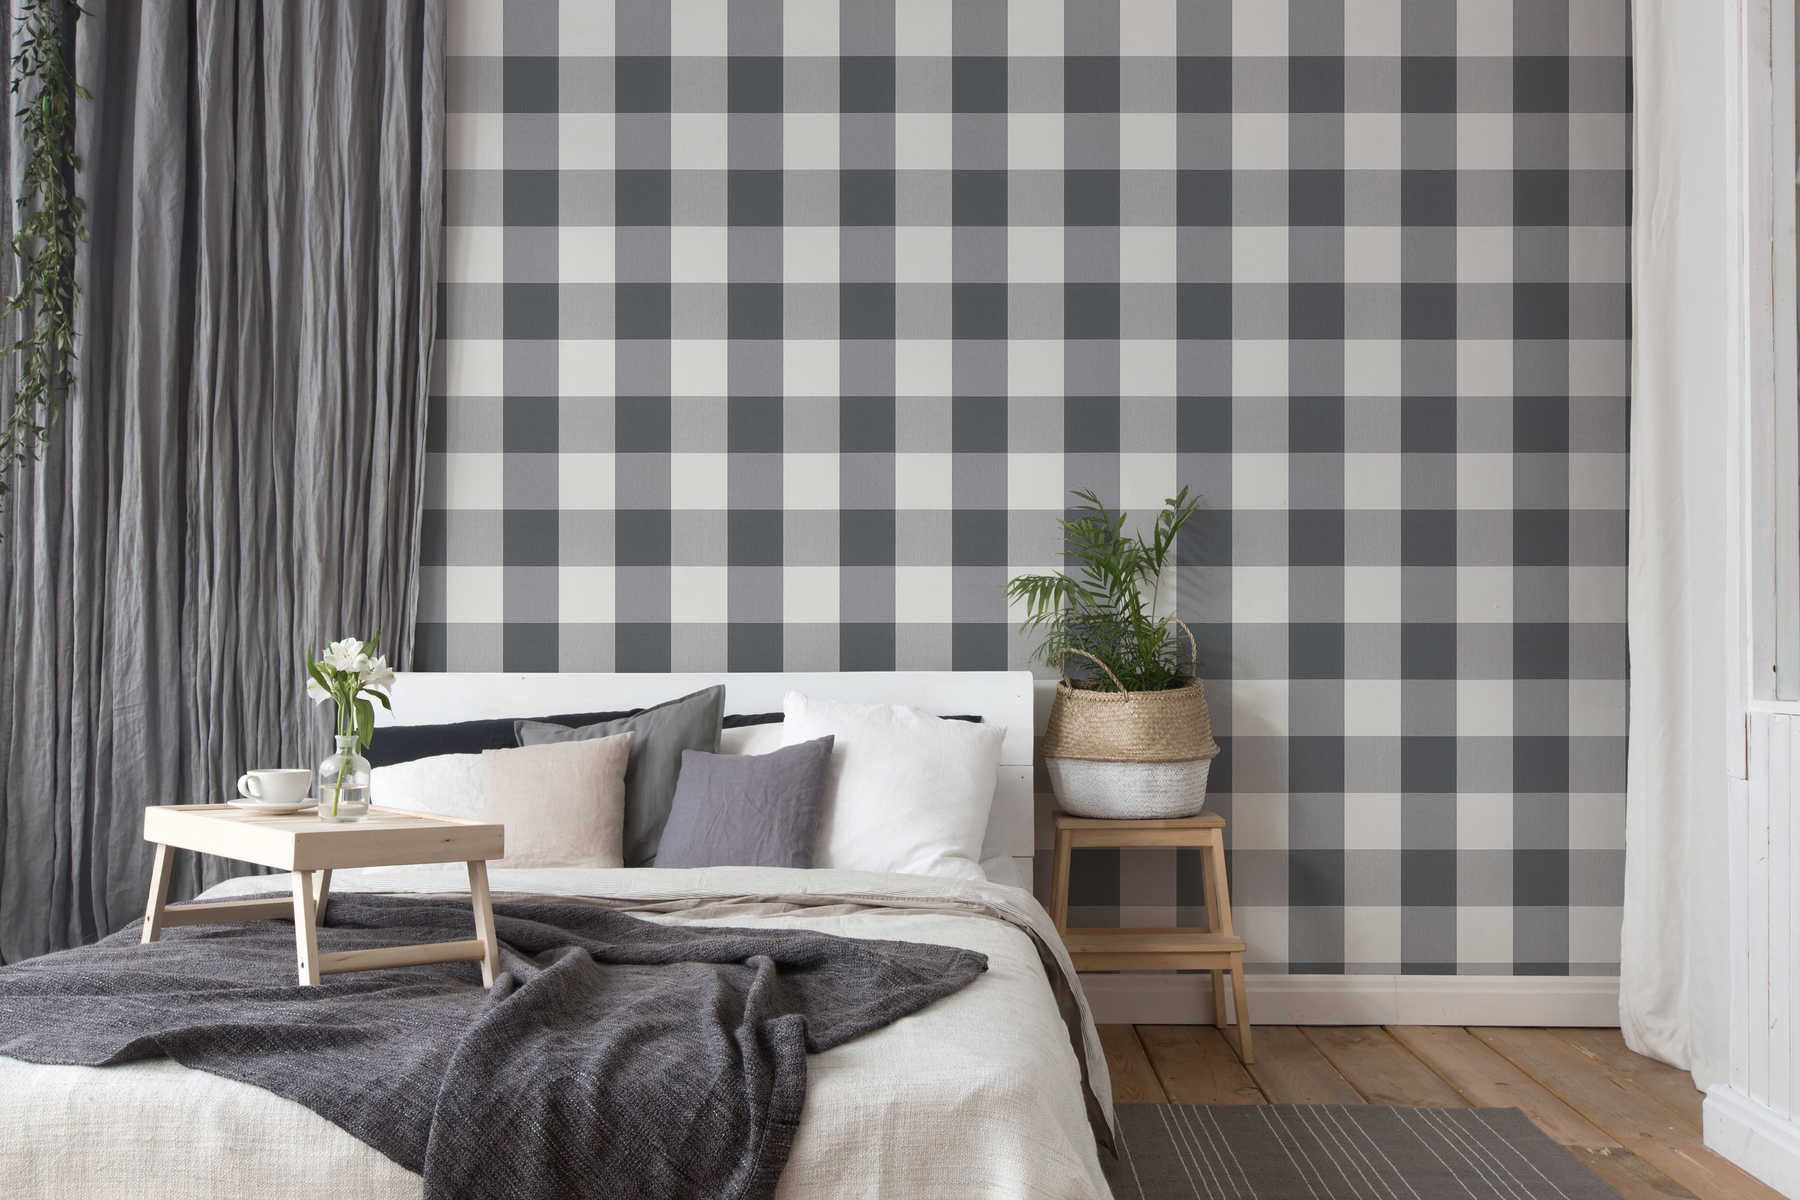             Plaid wallpaper with textile look in harmonious colours - white, grey
        